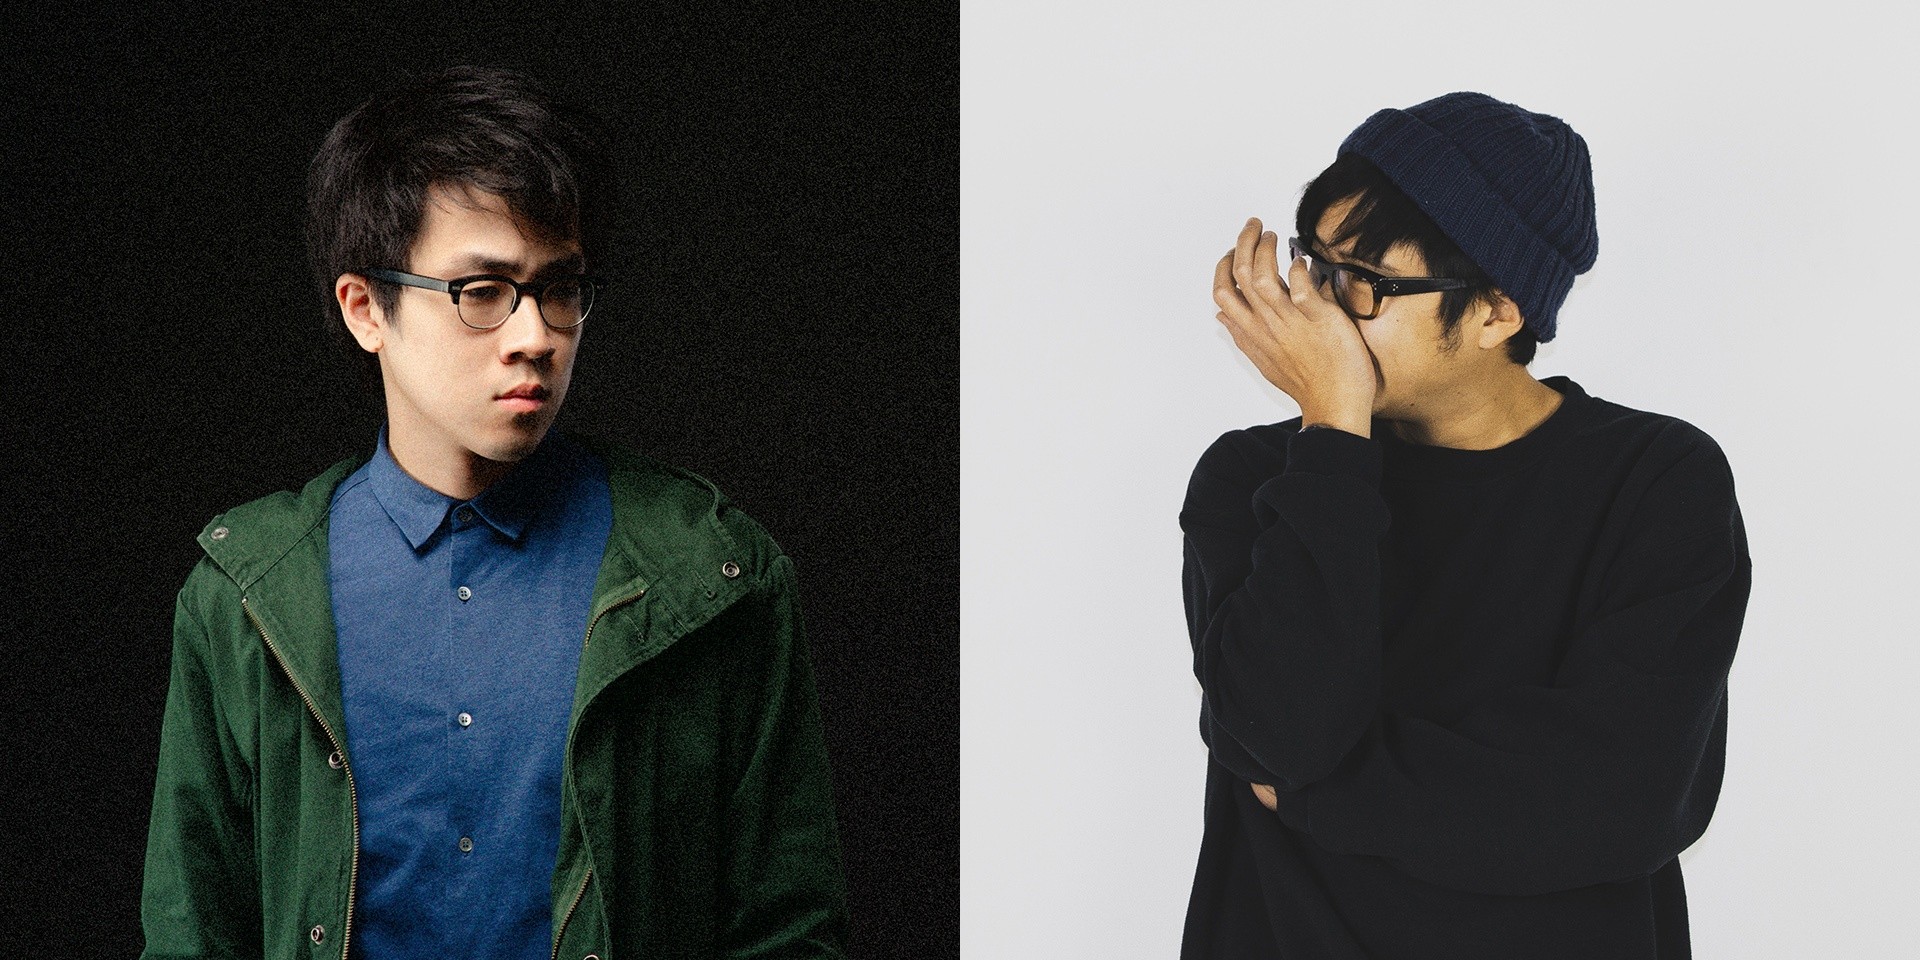 Esplanade kicks off 2018 with All Things New — Charlie Lim, Yeo, Cosmic Child & more 